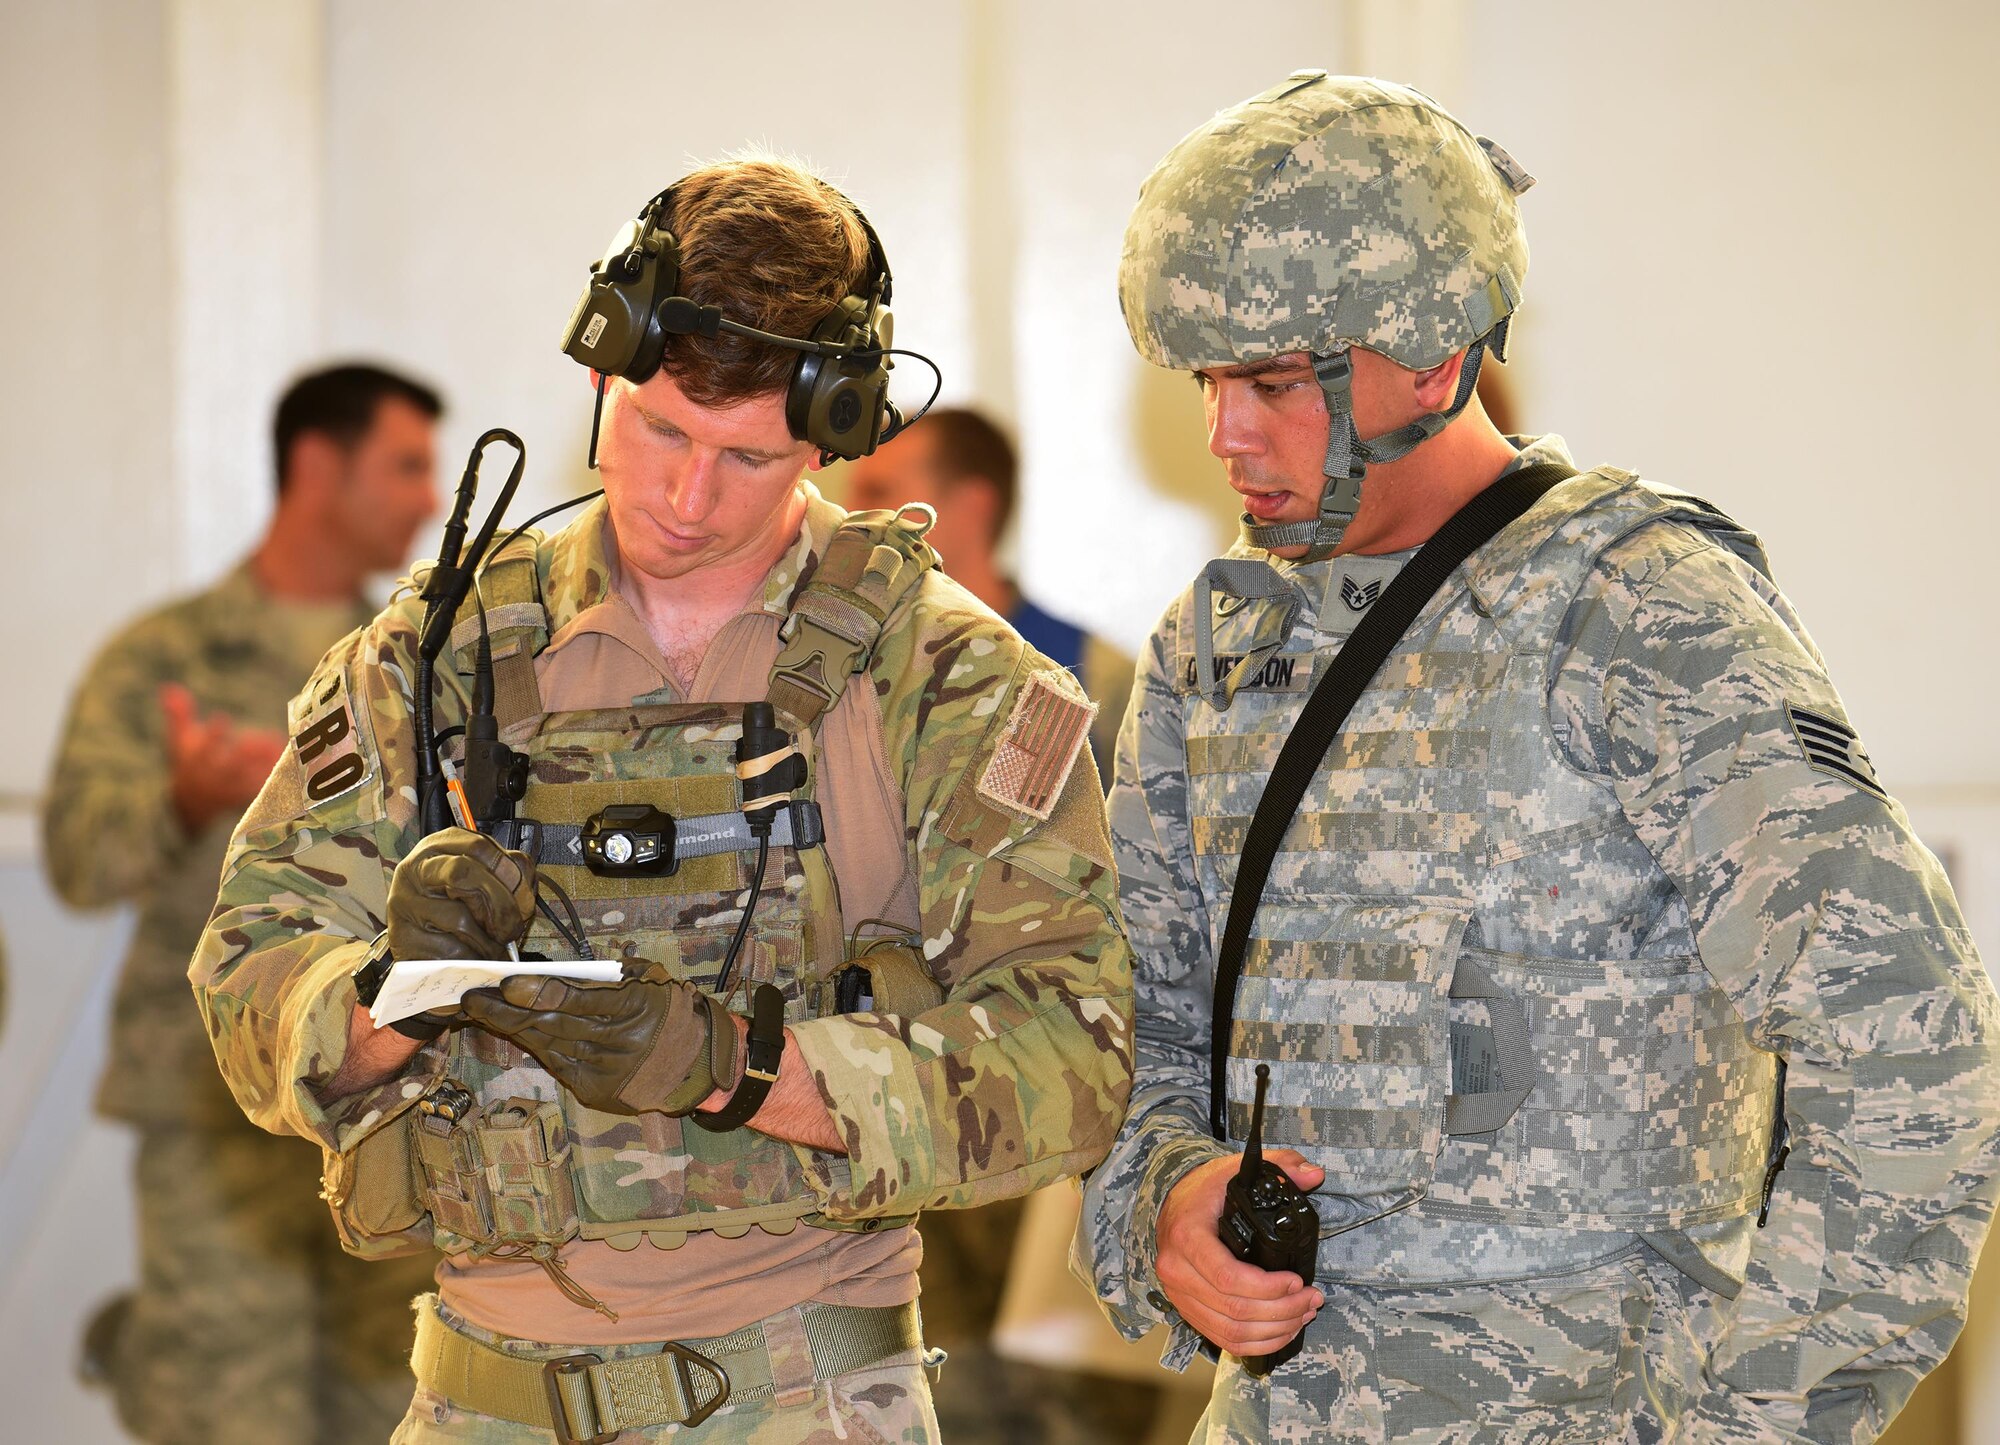 First Lt. Ryan Kelly, 38th Rescue Squadron combat rescue officer, works with Staff Sgt. Jesse Ouverson, 45th Security Forces Squadron defender, to assess the victims of an active shooter exercise incident July 25, 2017 in Hangar 750. Kelly, who is on temporary duty with the 308th Rescue Squadron, and the pararescue team oversaw the care of the victims until the 45th Civil Engineer Squadron firefighters arrived. The exercise, which ran early morning through mid afternoon, was a joint endeavor between the host 45th Space Wing and 920th Rescue Wing. (U.S. Air Force photo/Tech. Sgt. Lindsey Maurice)